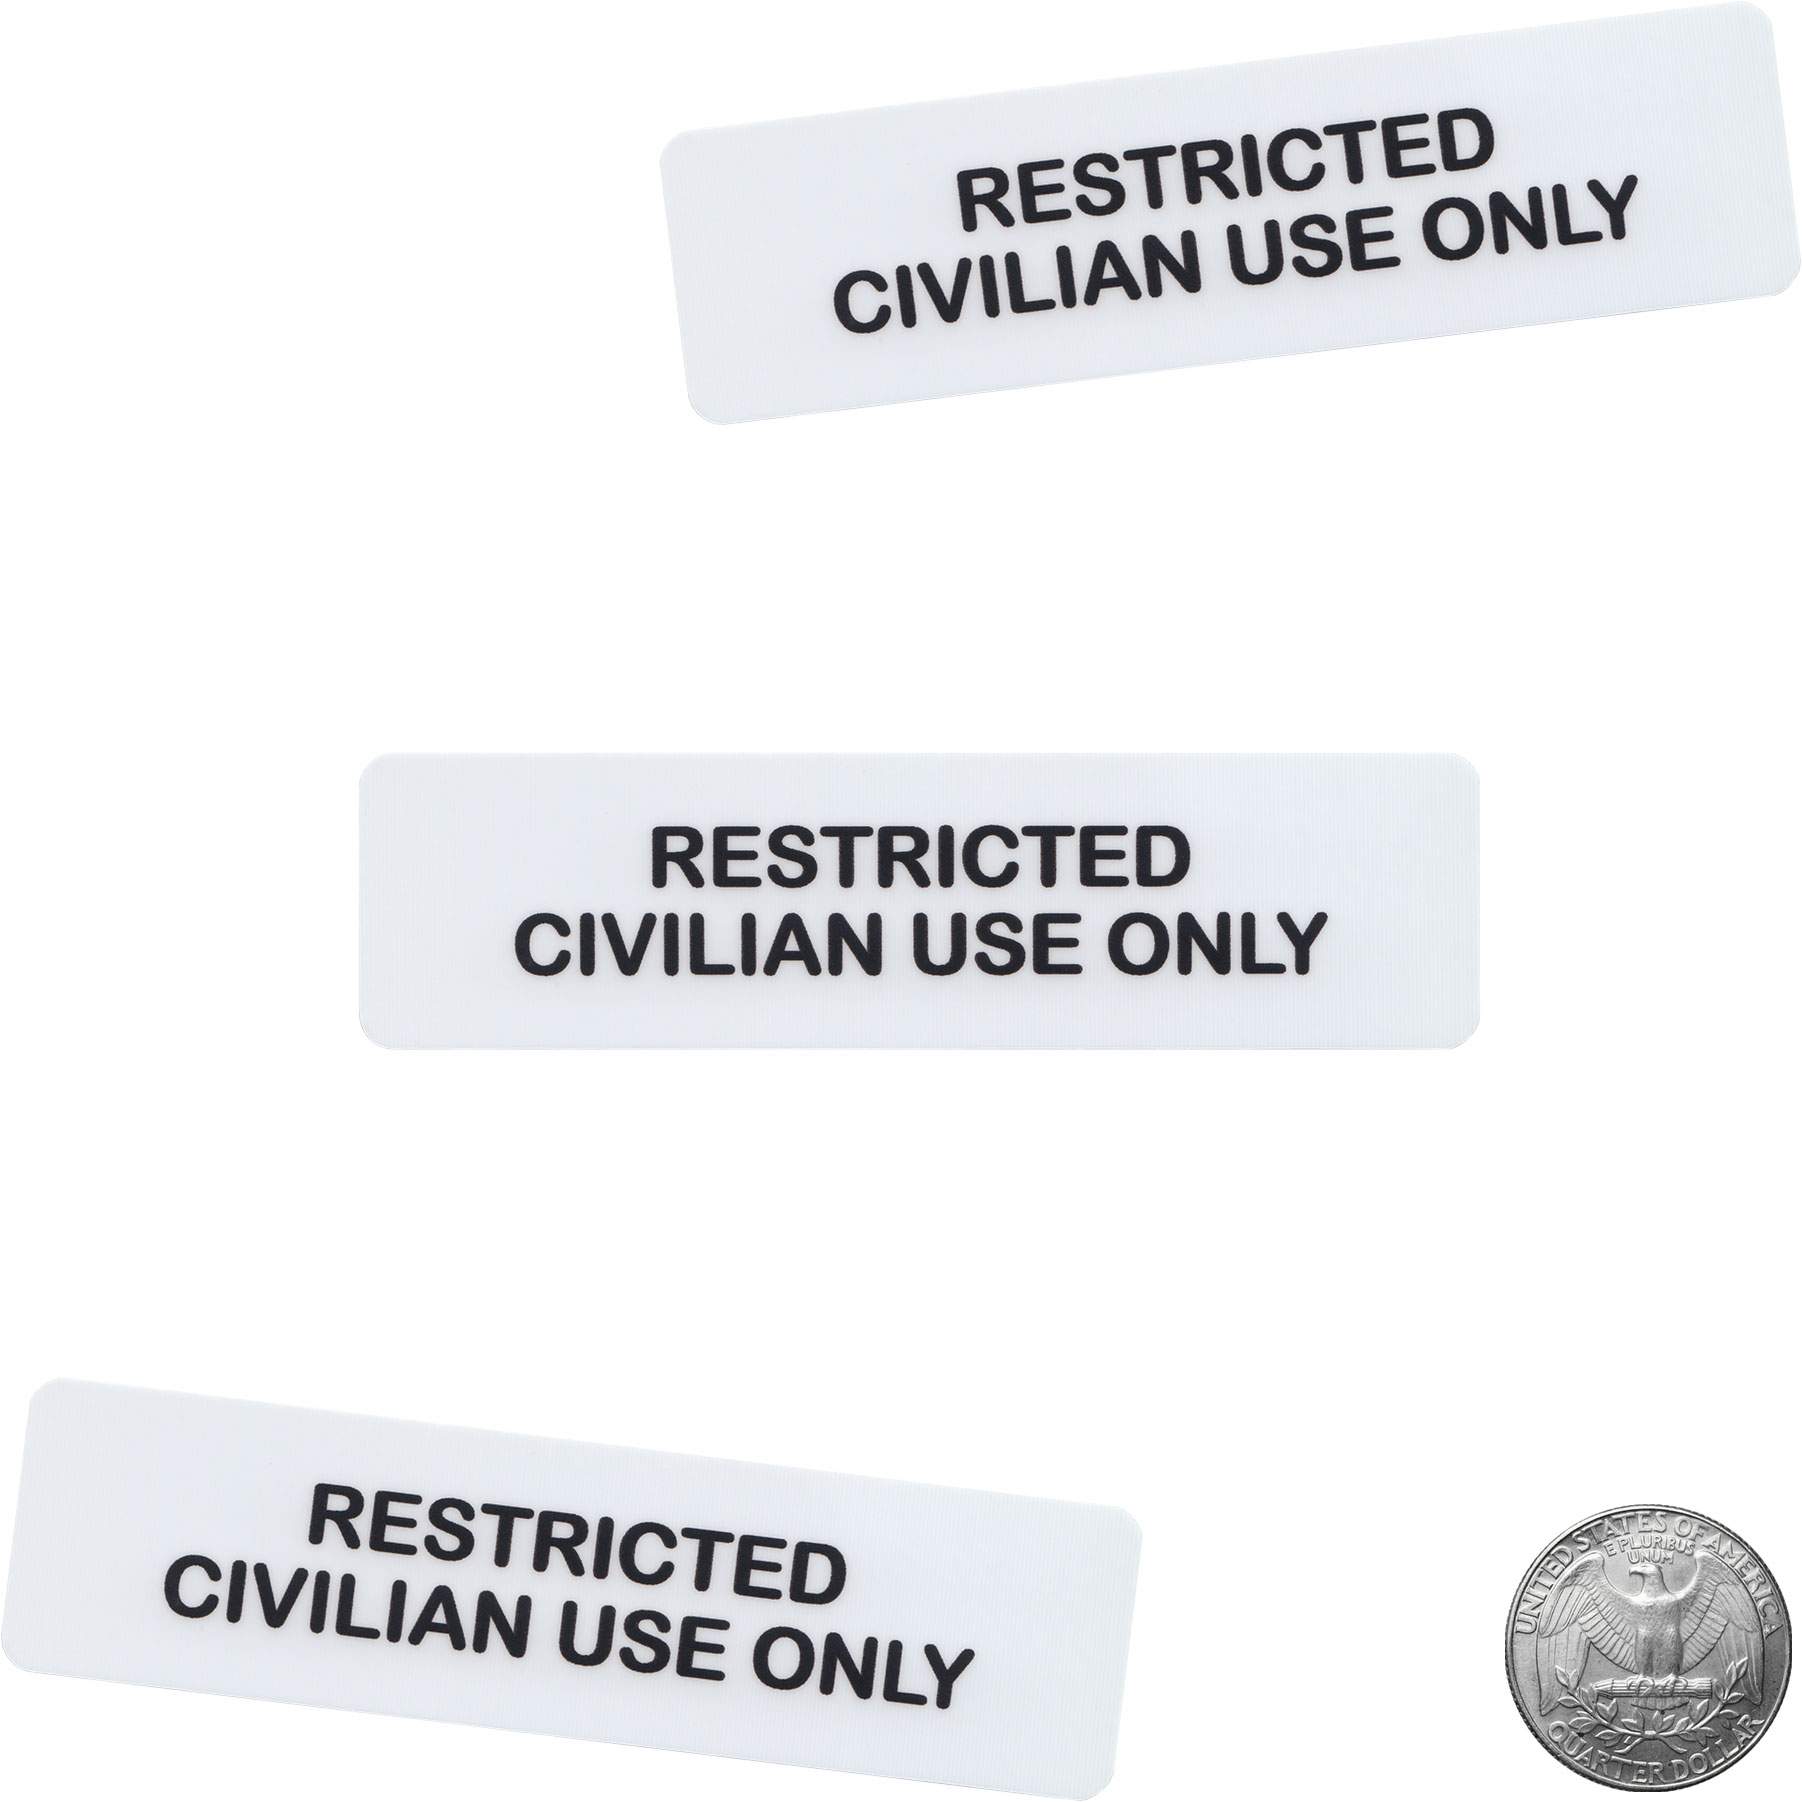 Restricted Civilian Use Only Vinyl Sticker